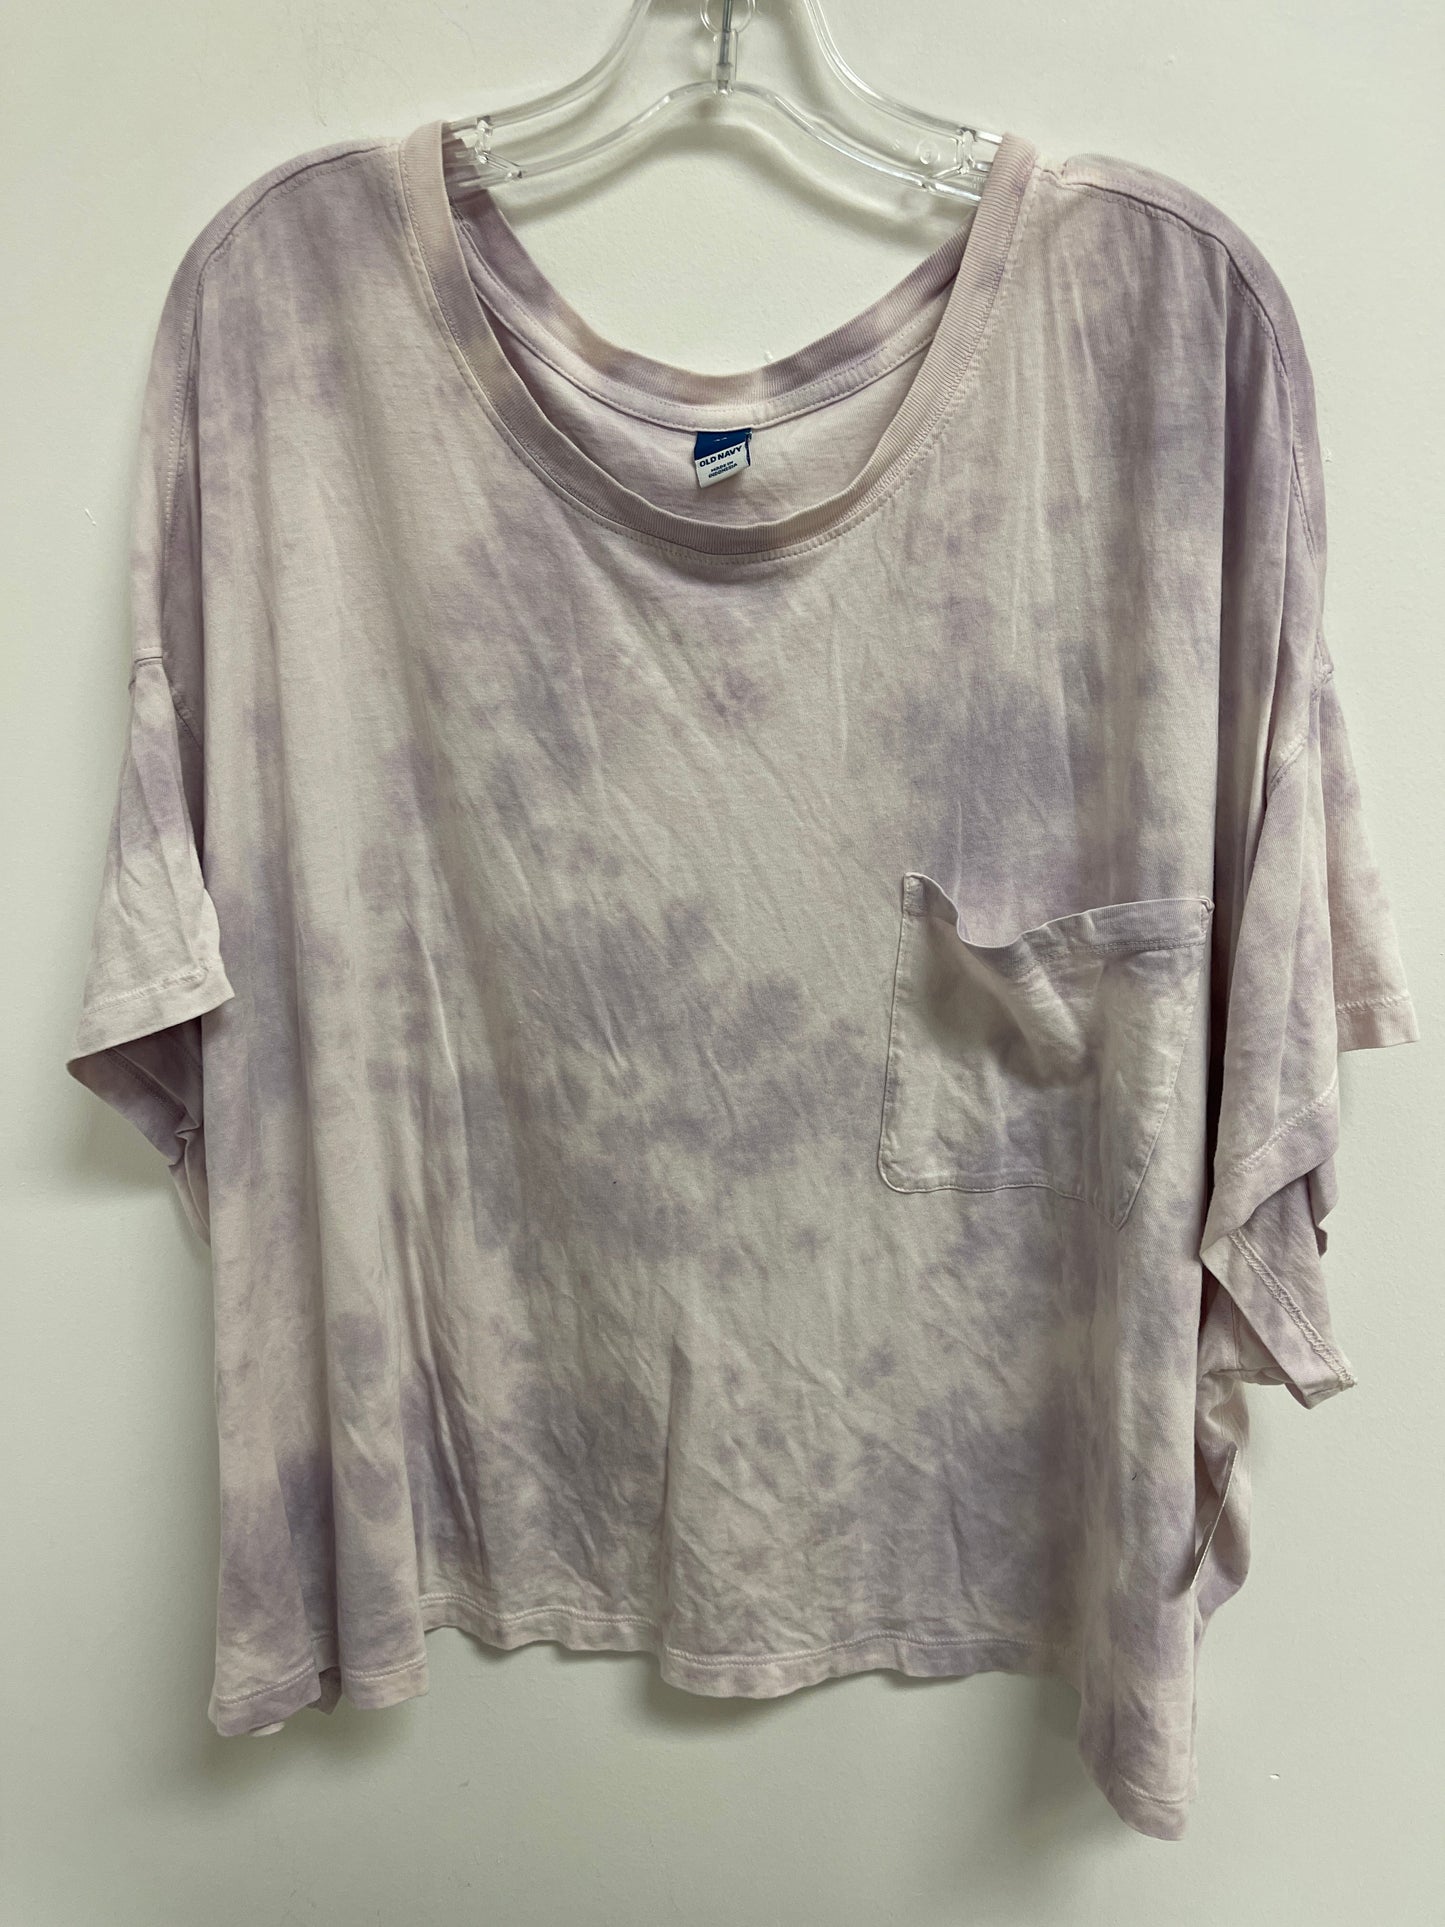 Purple Top Short Sleeve Old Navy, Size 4x